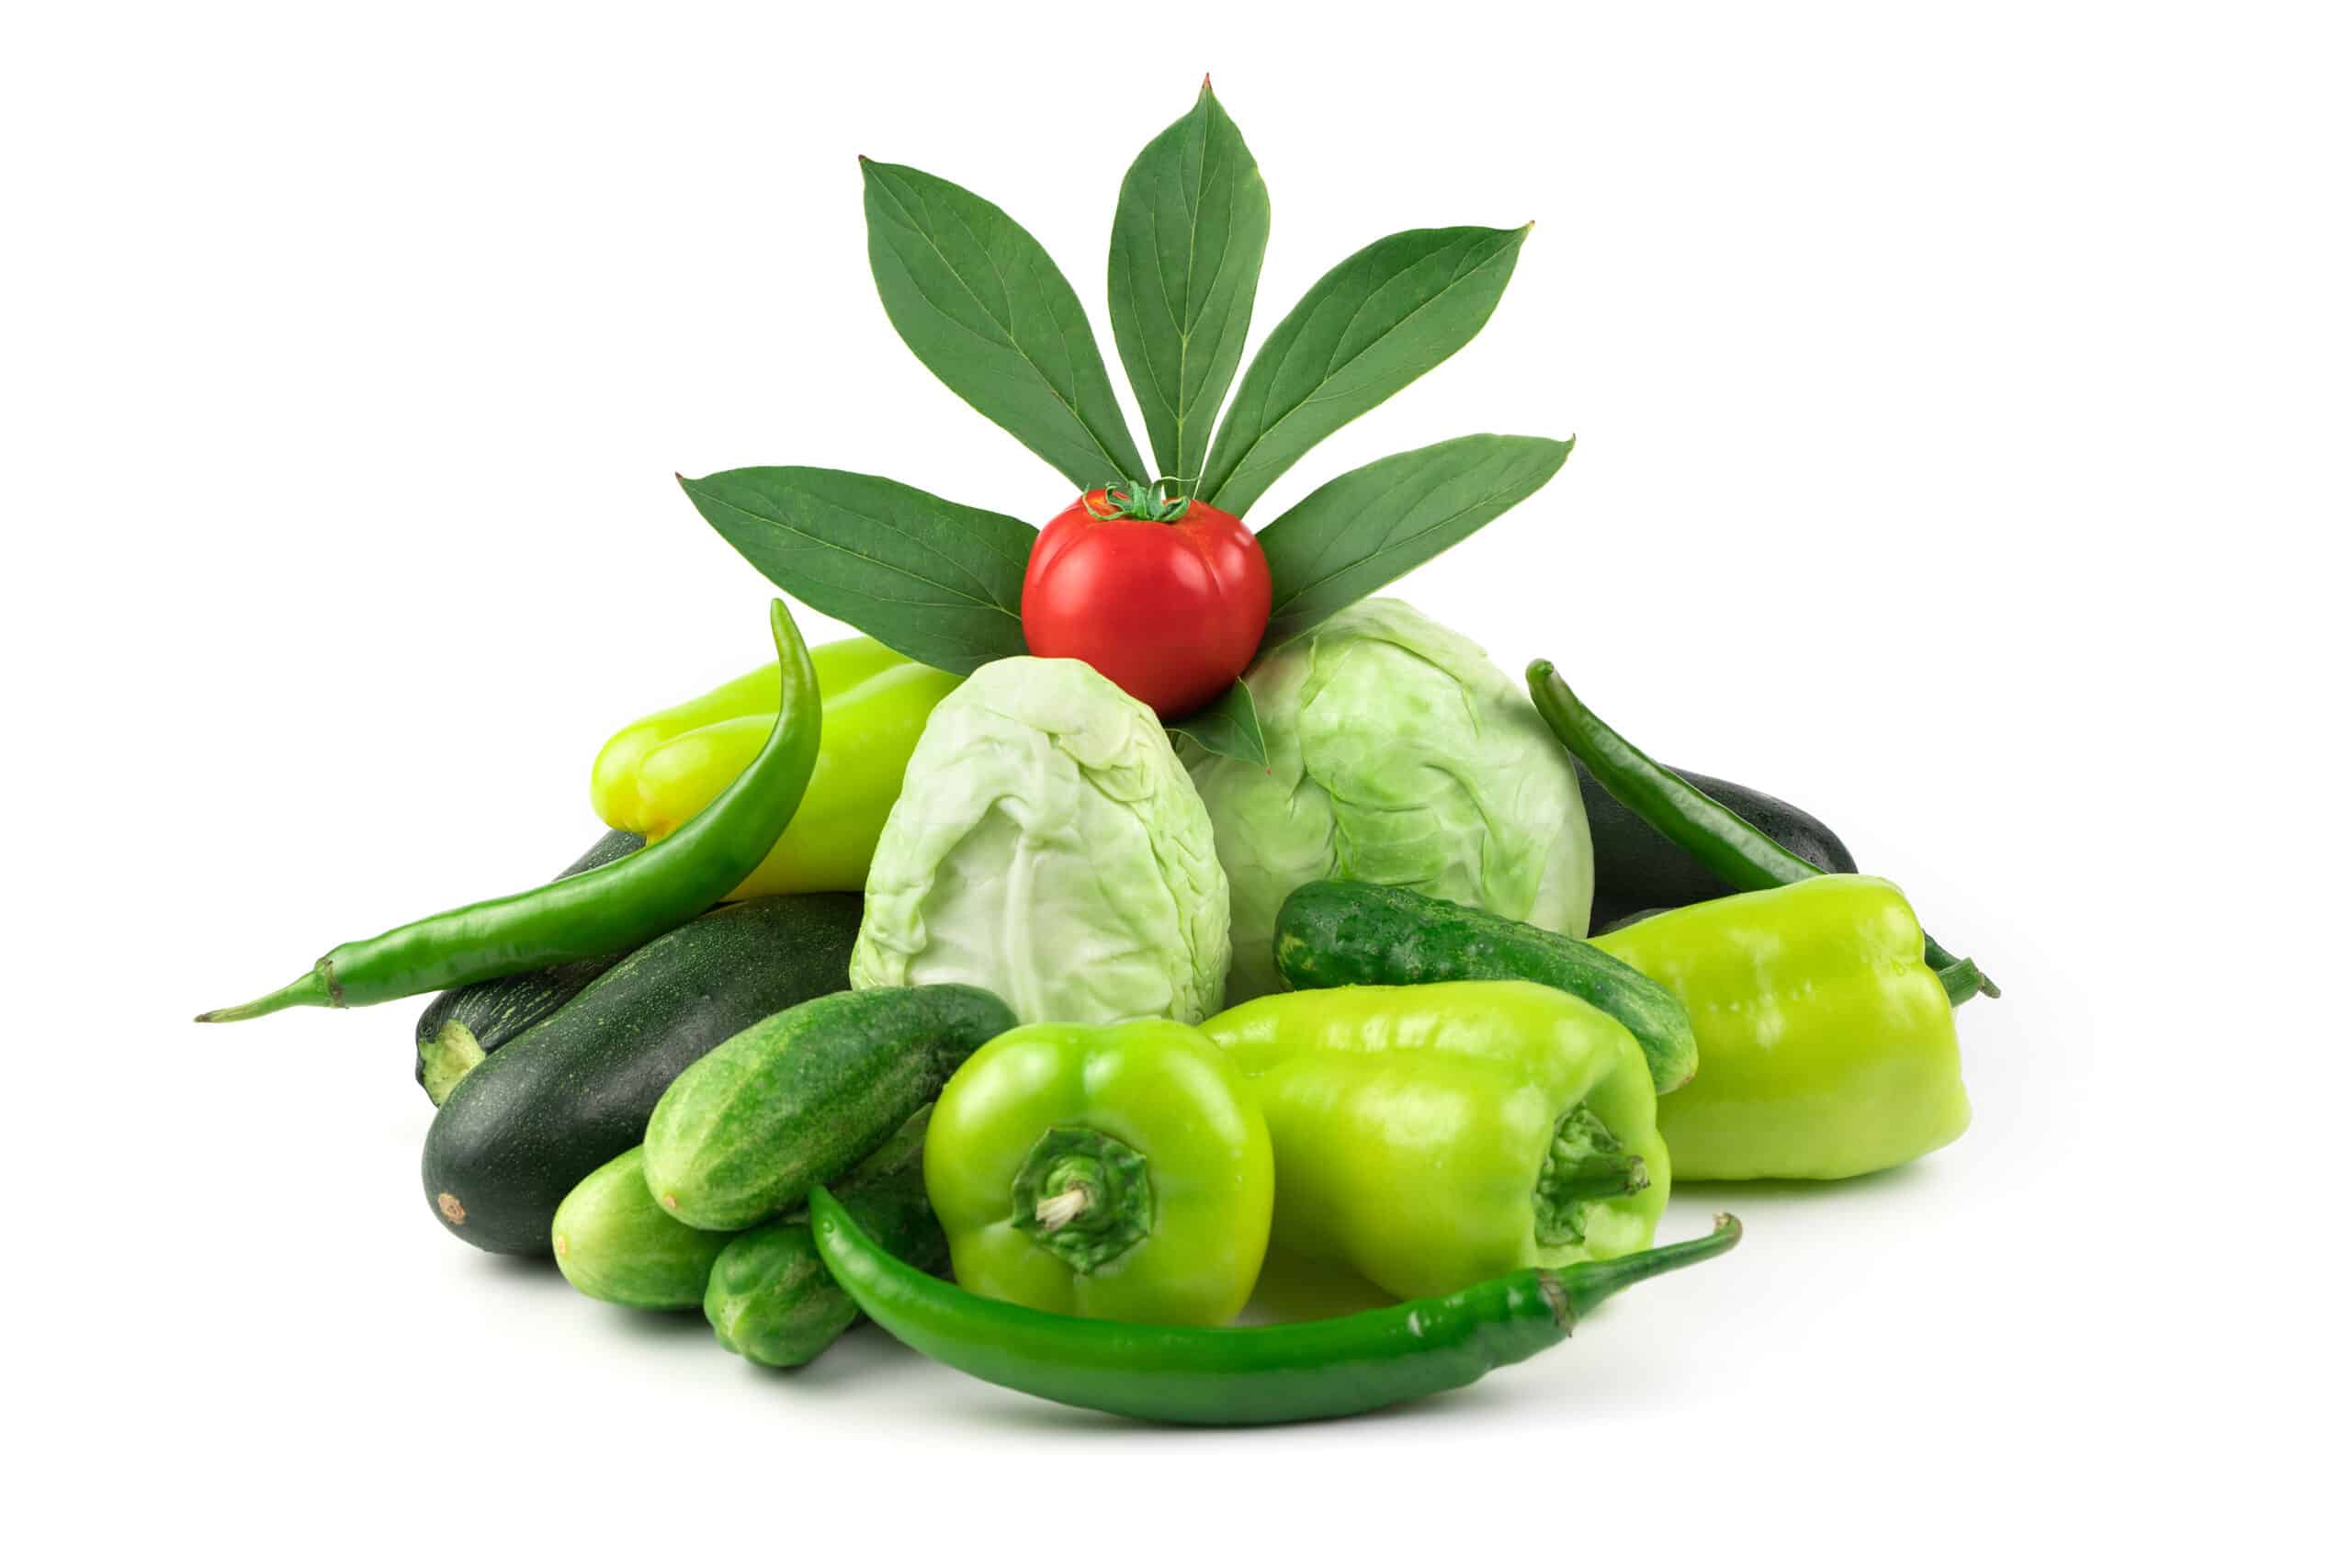 Green vegetables and tomatoes. Various vegetables: cabbage, cucumbers, peppers, zucchini and a green branch with leaves on a white background. The concept of proper nutrition.